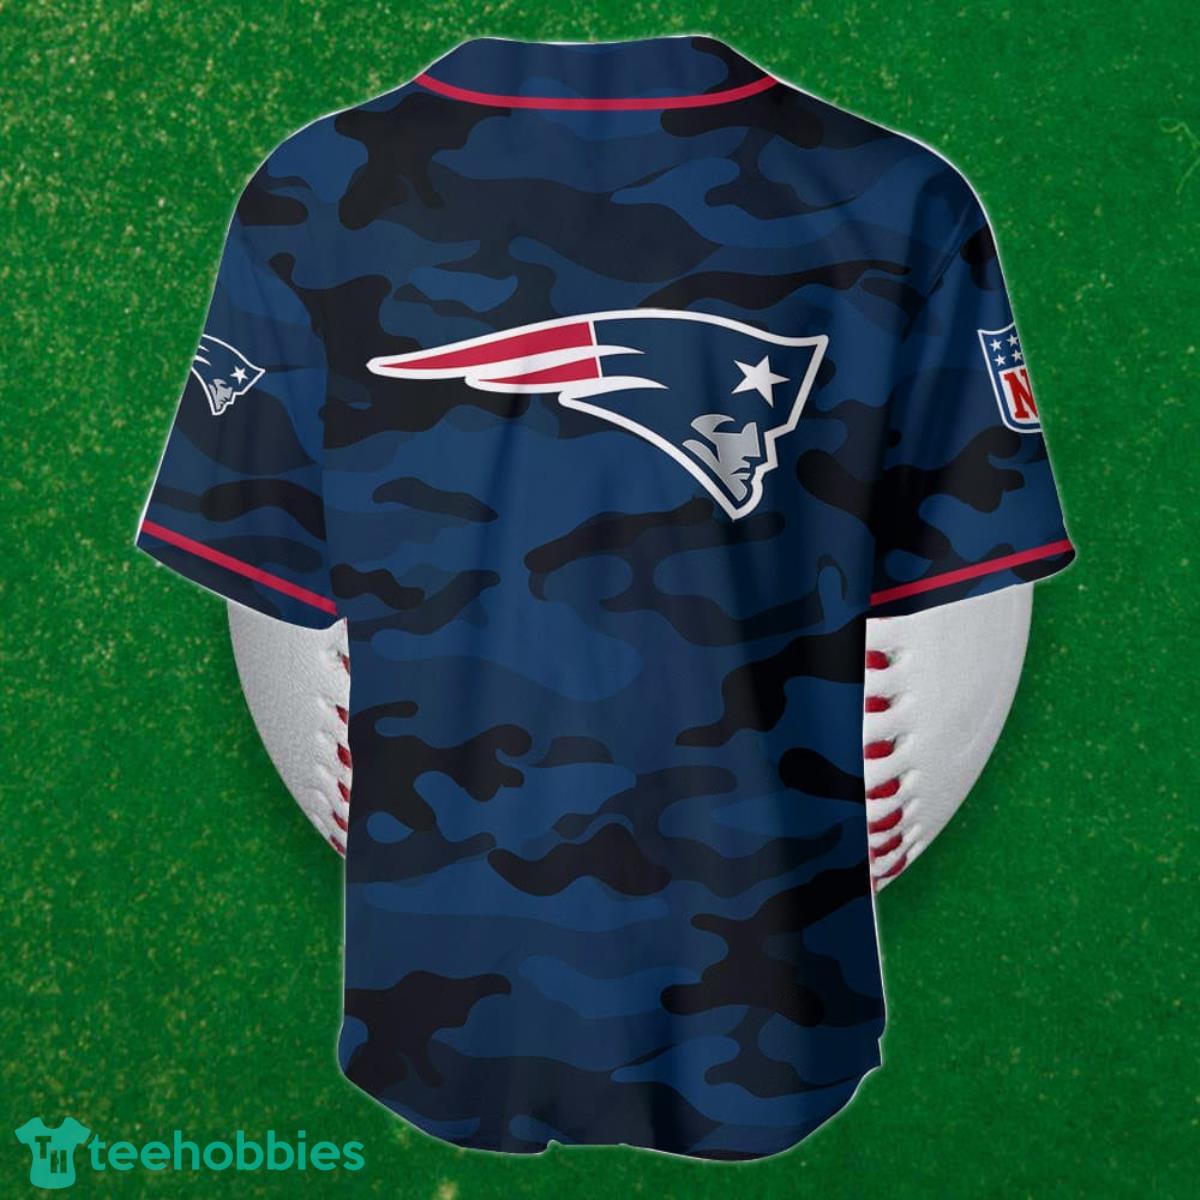 New England Patriots-NFL BASEBALL JERSEY CUSTOM NAME AND NUMBER